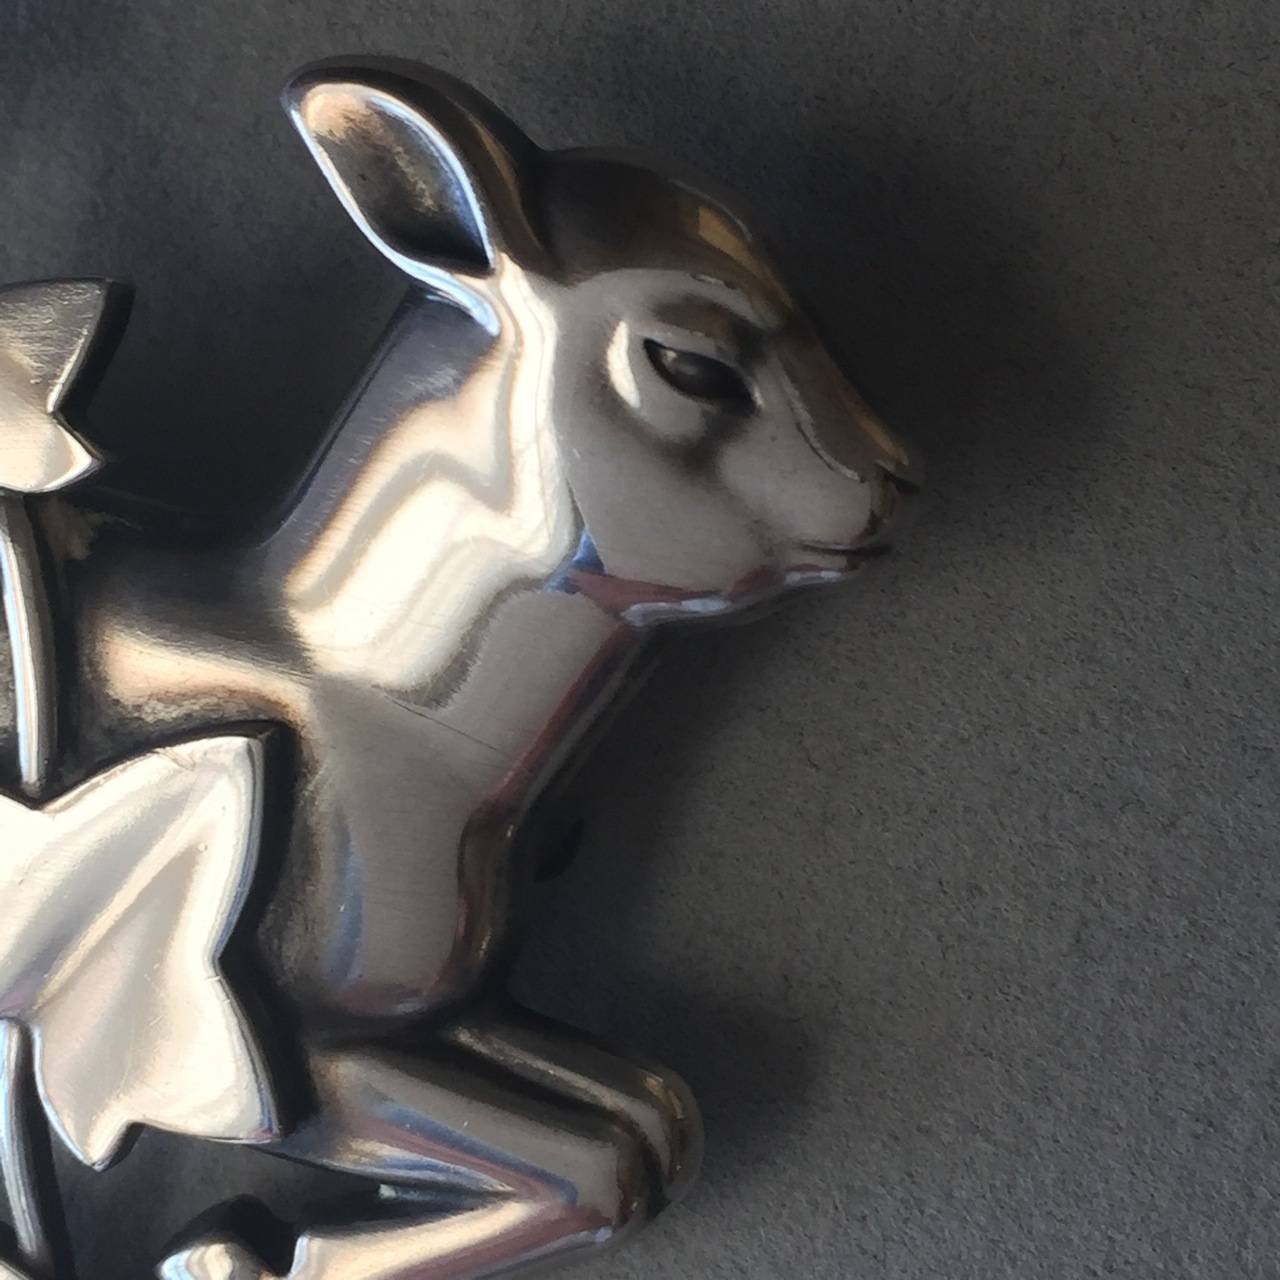 Georg Jensen Sterling Silver Lamb and Ivy Brooch No 311 by Arno Malinowski

Highly sought-after design, rarely seen. Beautiful, original condition.

Dimensions: 2